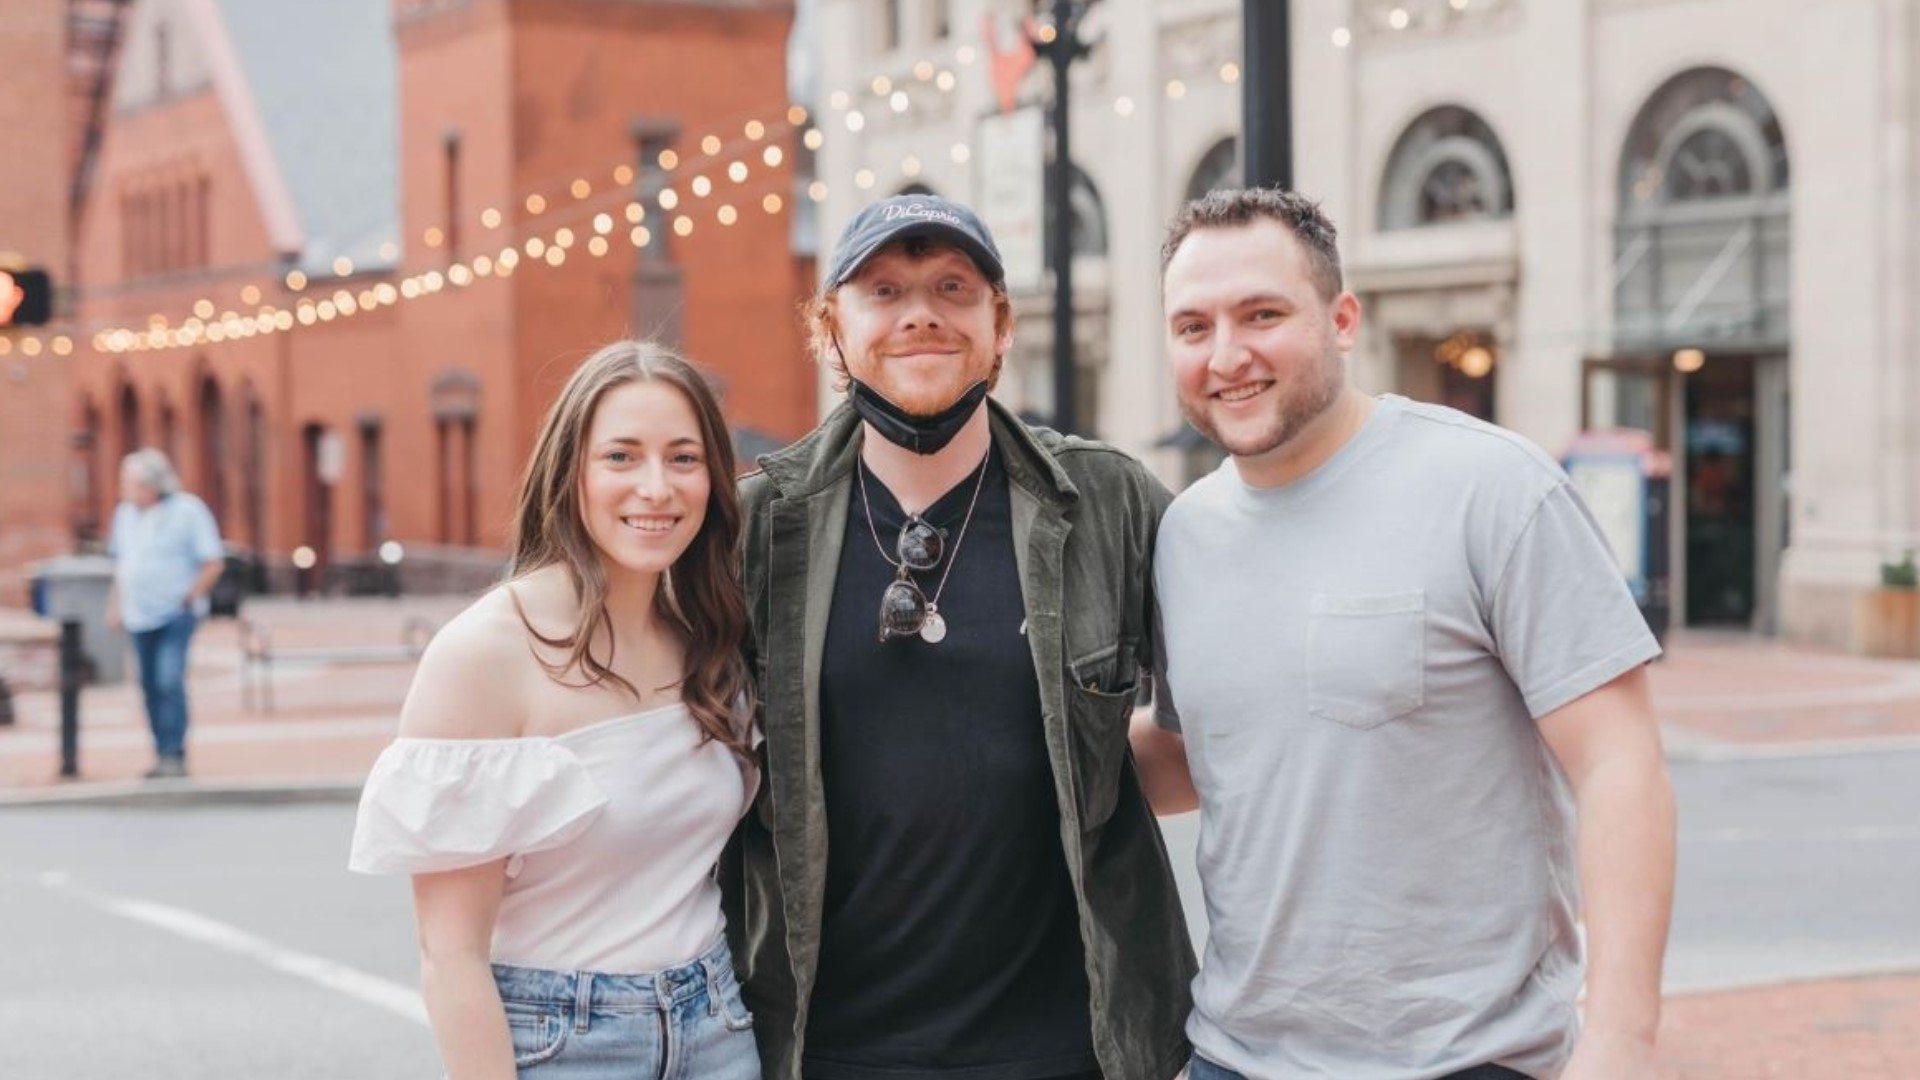 The actor, who played Ronald Weasley in the Potter films, posed with a couple who was in Penn Square taking engagement photos Wednesday evening.